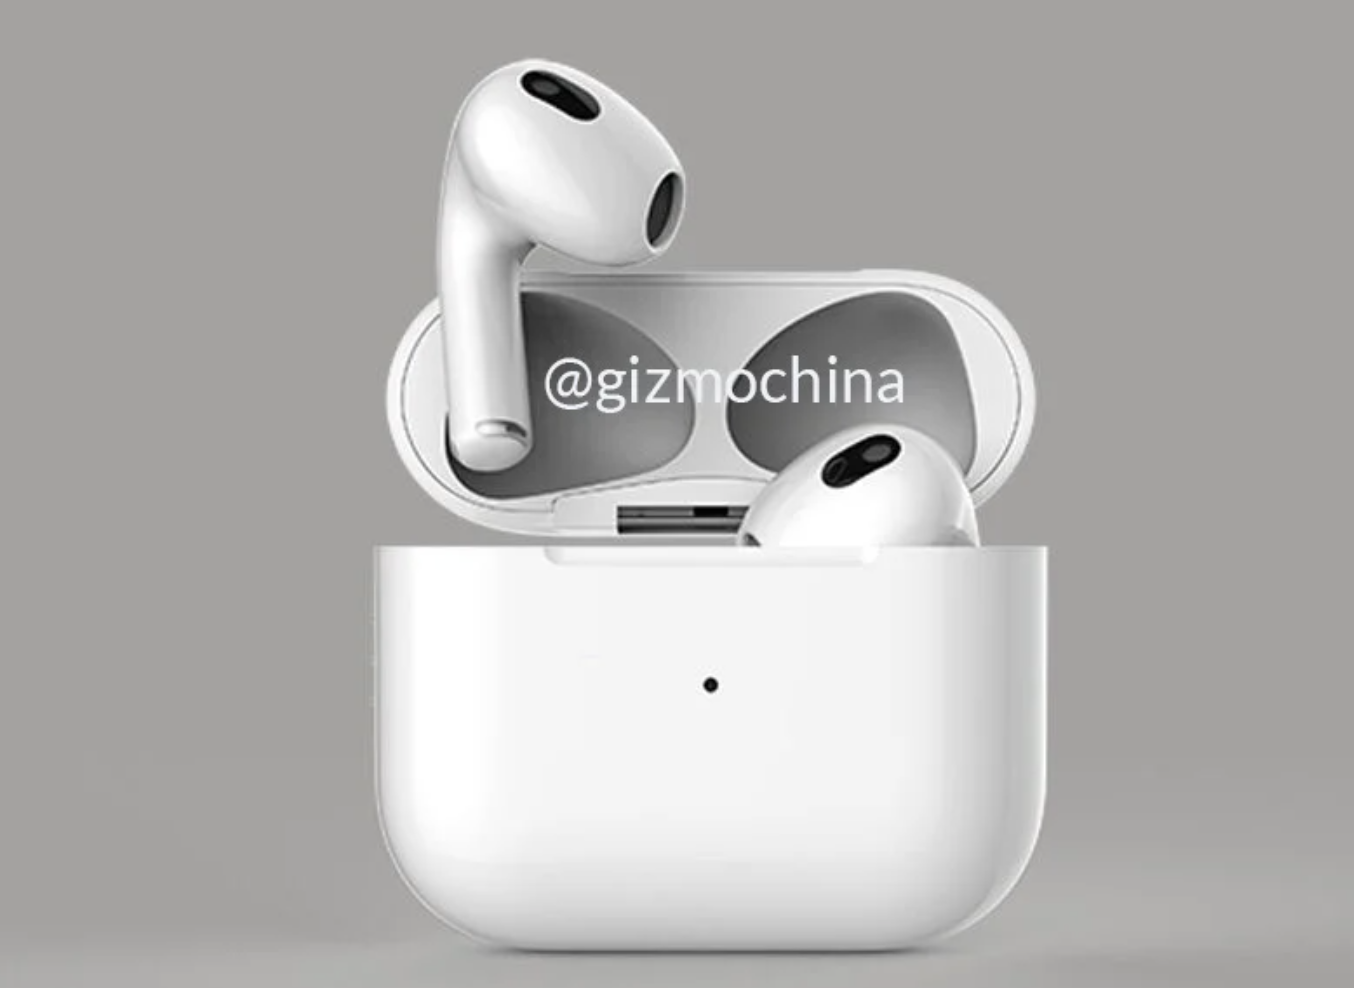 Airpods 3 разница. Apple AIRPODS Pro 3. Наушники Apple AIRPODS (3rd Generation) mme73. AIRPODS 3 2021. Аирподс 3 оригинал.